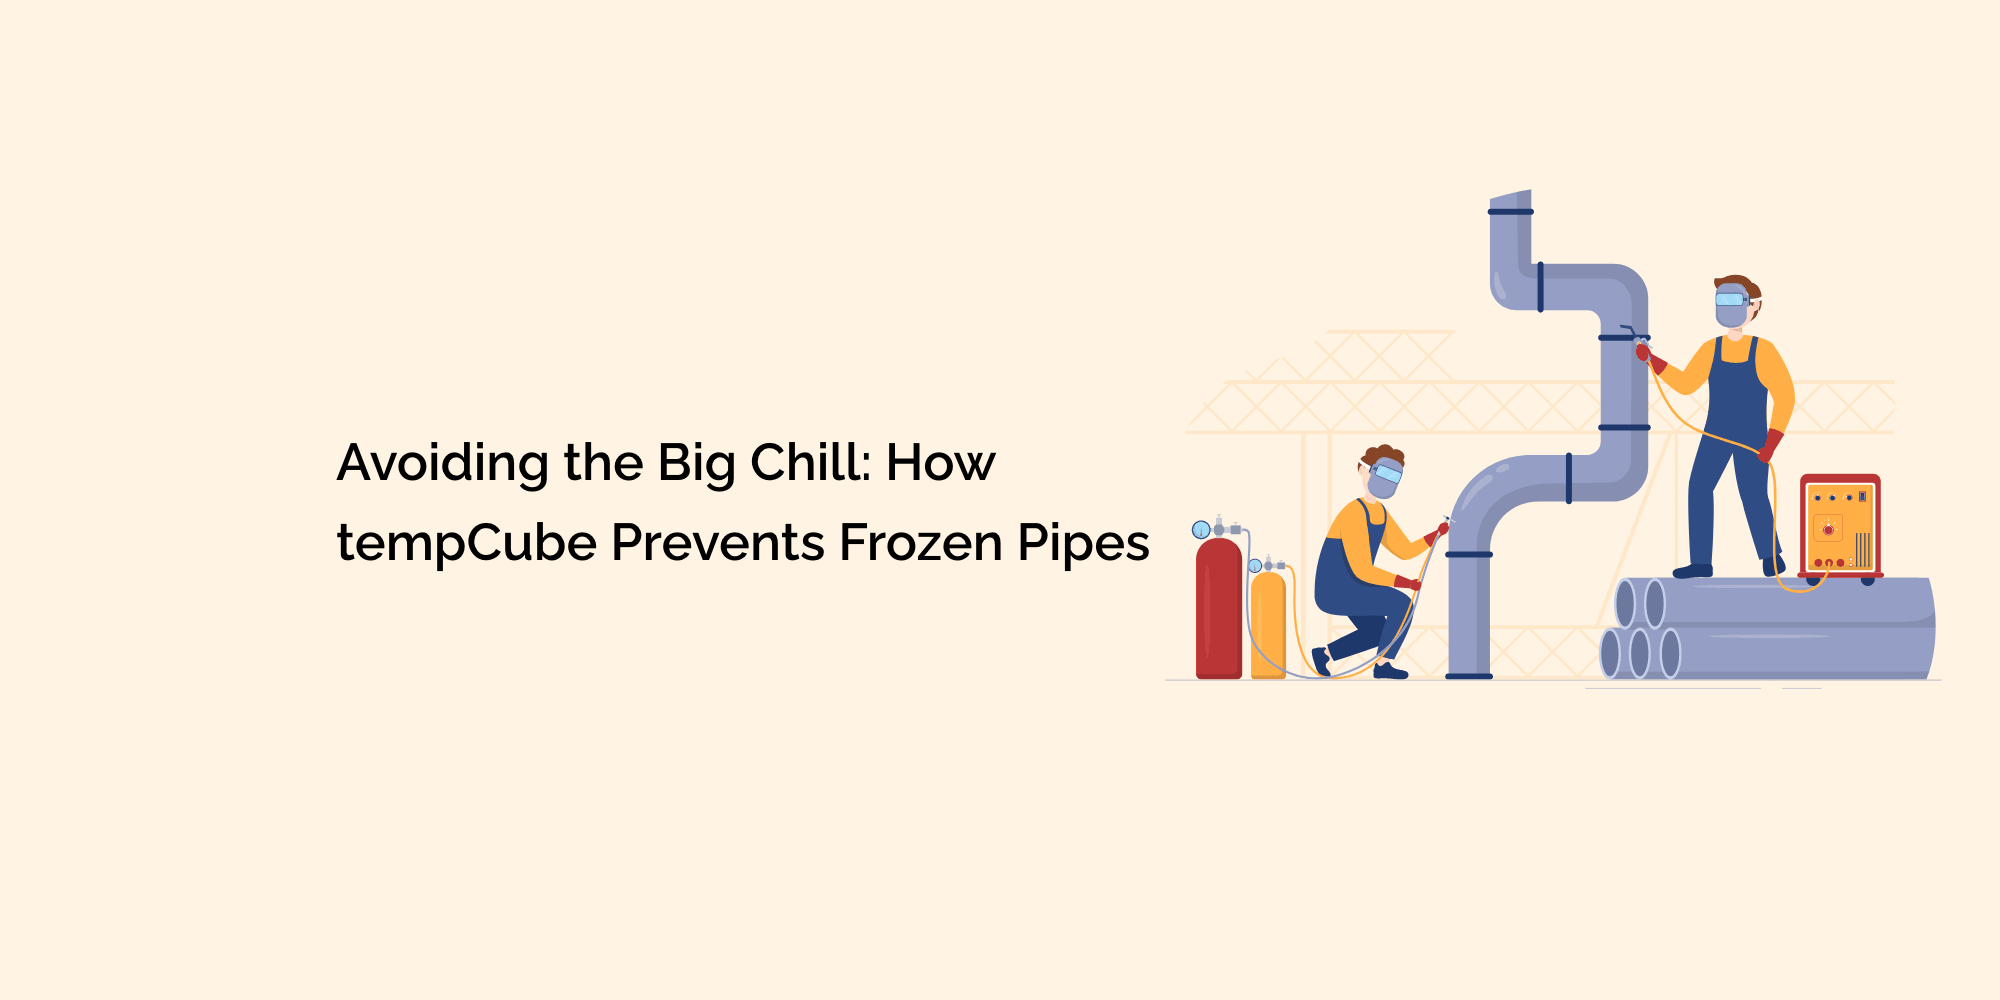 Avoiding the Big Chill: How tempCube Prevents Frozen Pipes